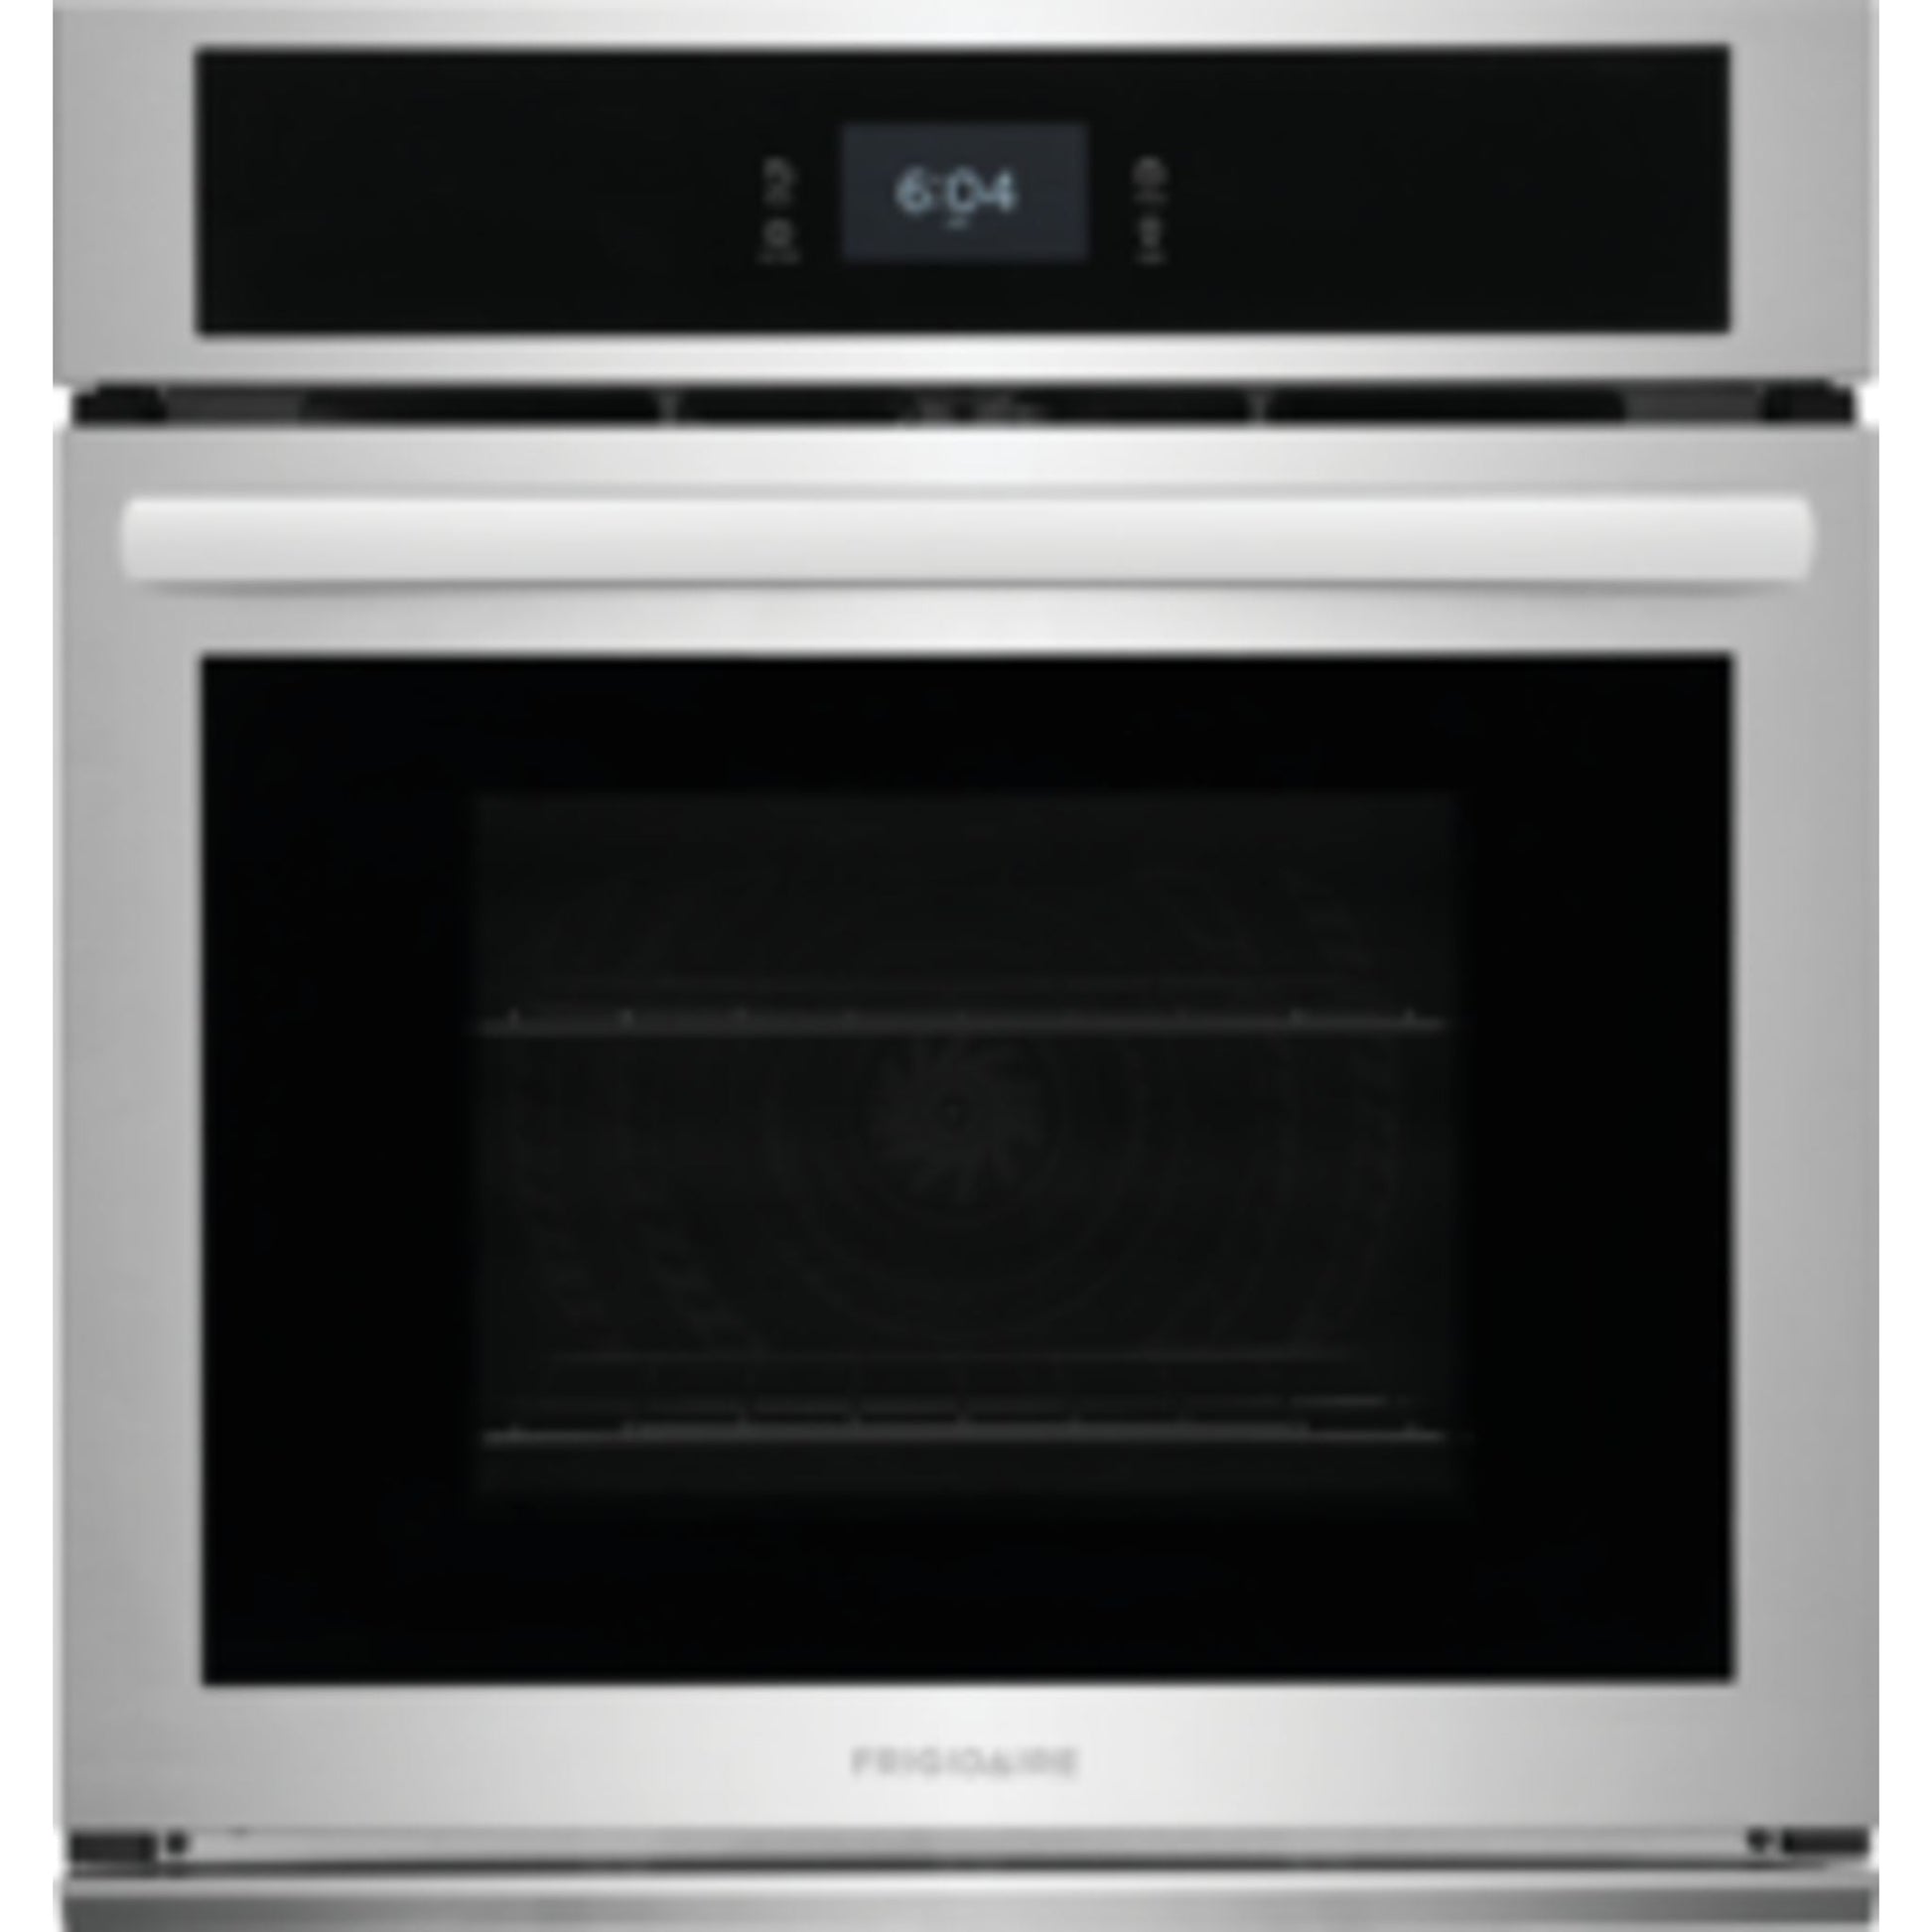 Frigidaire 27" Convection Wall Oven (FCWS2727AS) - Stainless